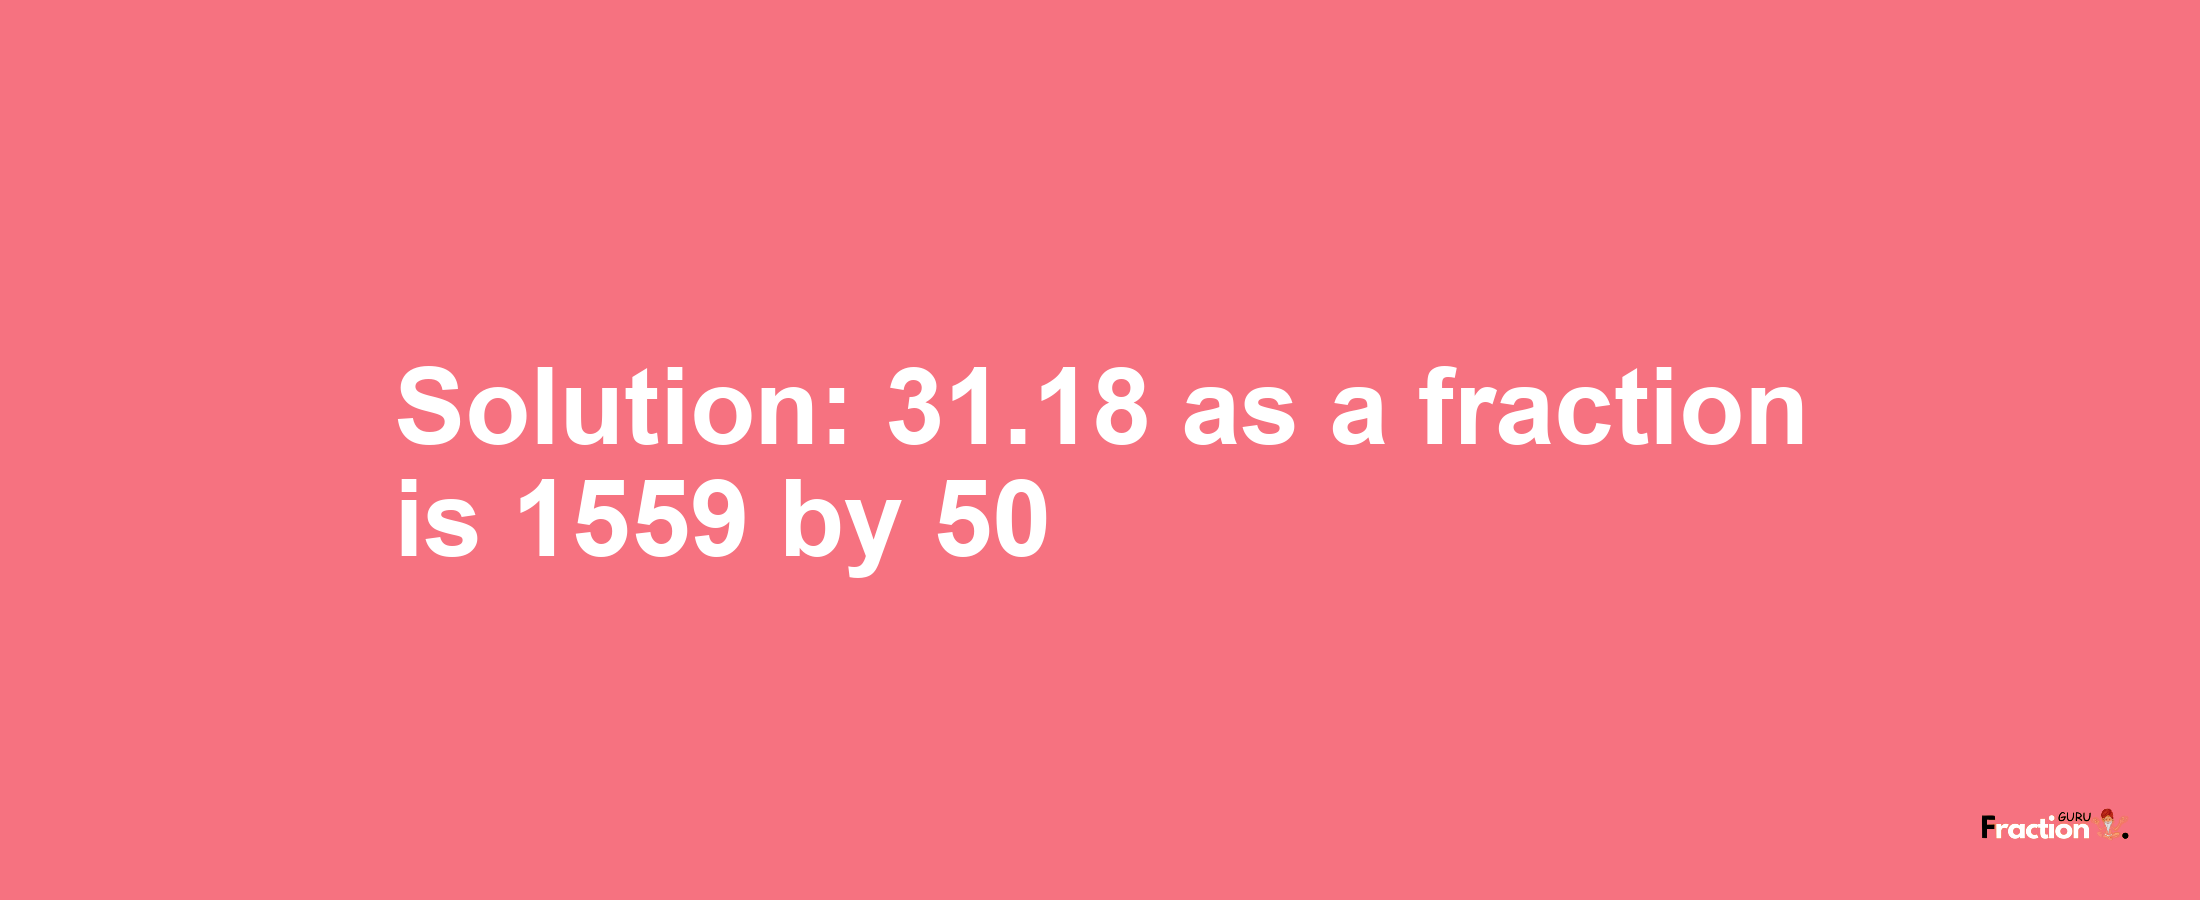 Solution:31.18 as a fraction is 1559/50